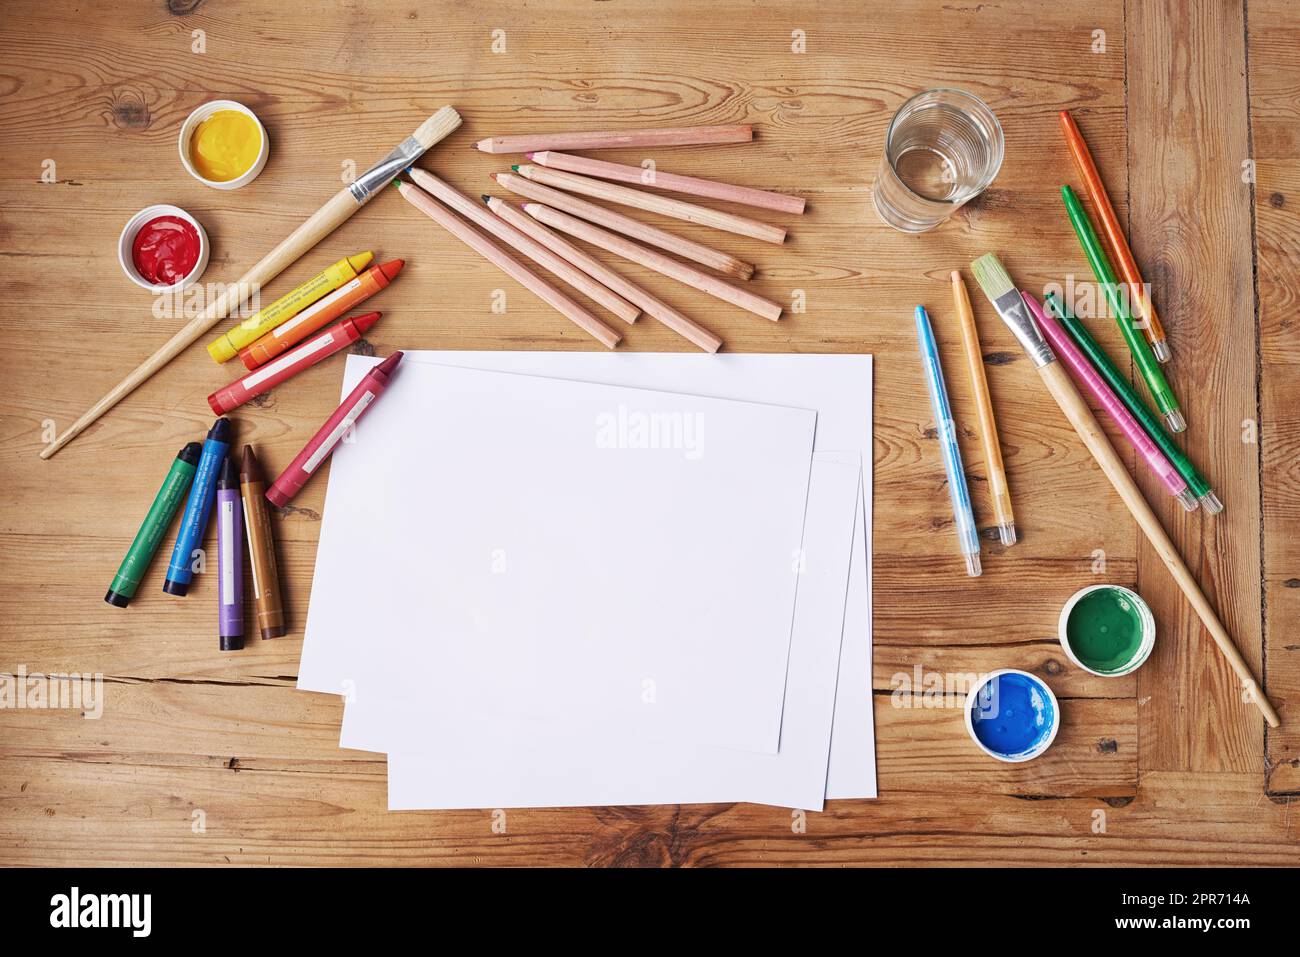 Creativity takes courage. Blank paper with painting supplies and pencils on a wooden table. Stock Photo